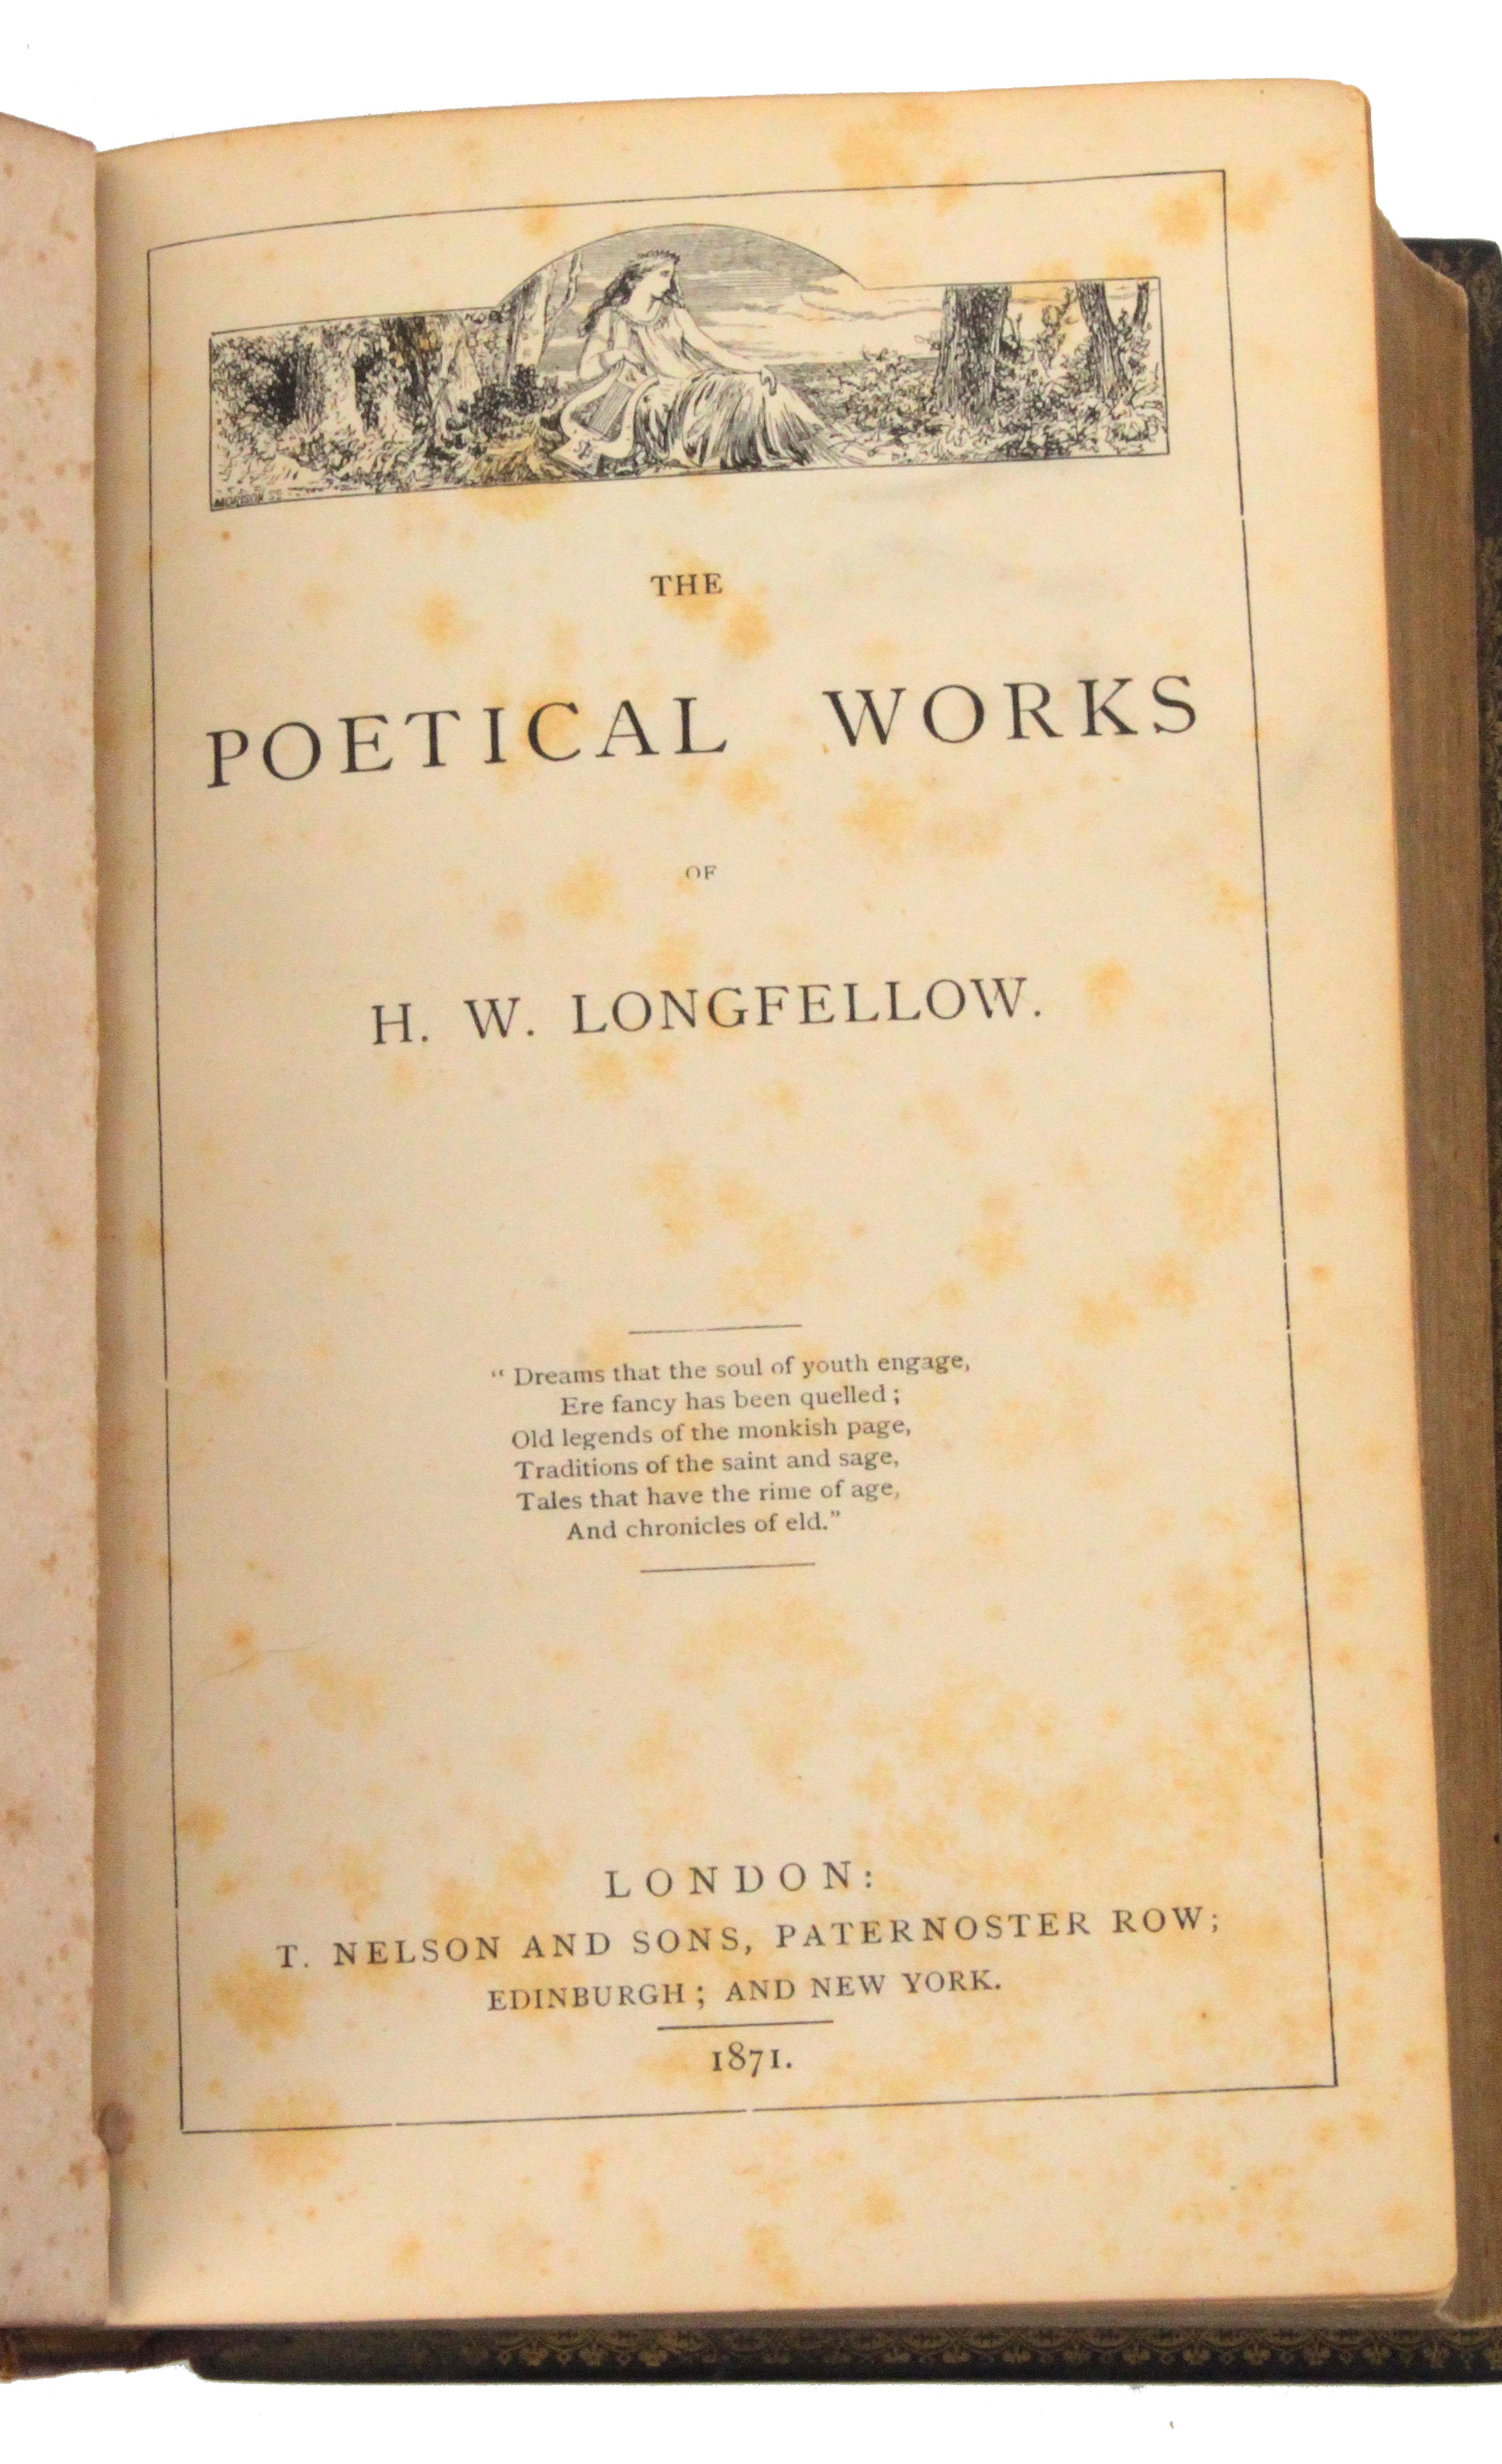 Fern ware - book, Longfellows Poetical Works, 1871, tooled leather spine, silhouette fern ware - Image 2 of 2